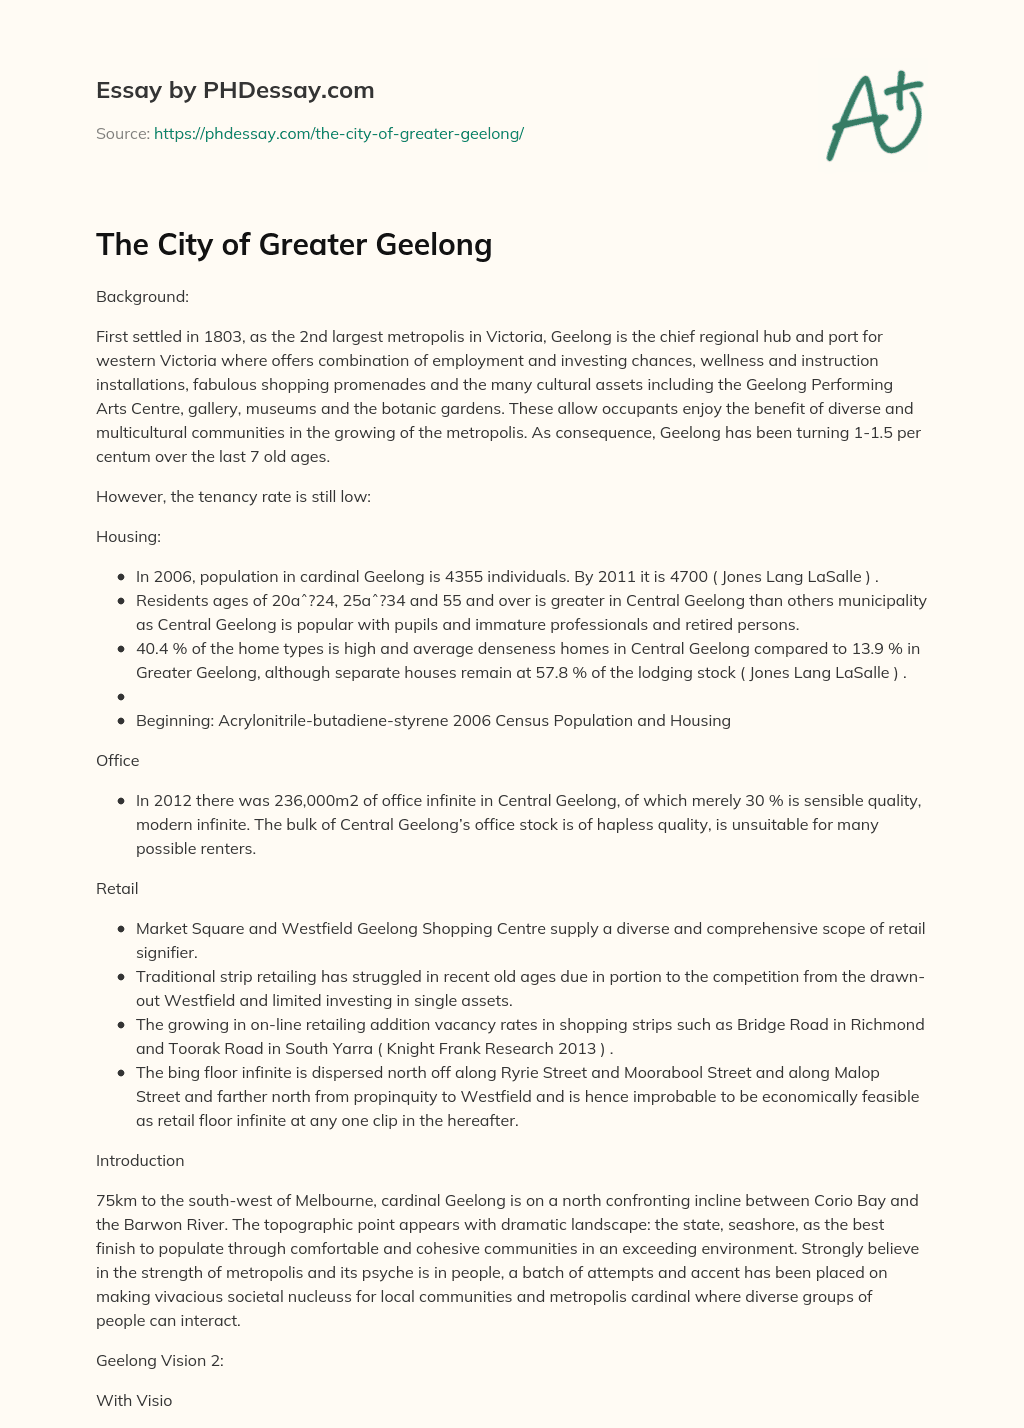 The City of Greater Geelong essay